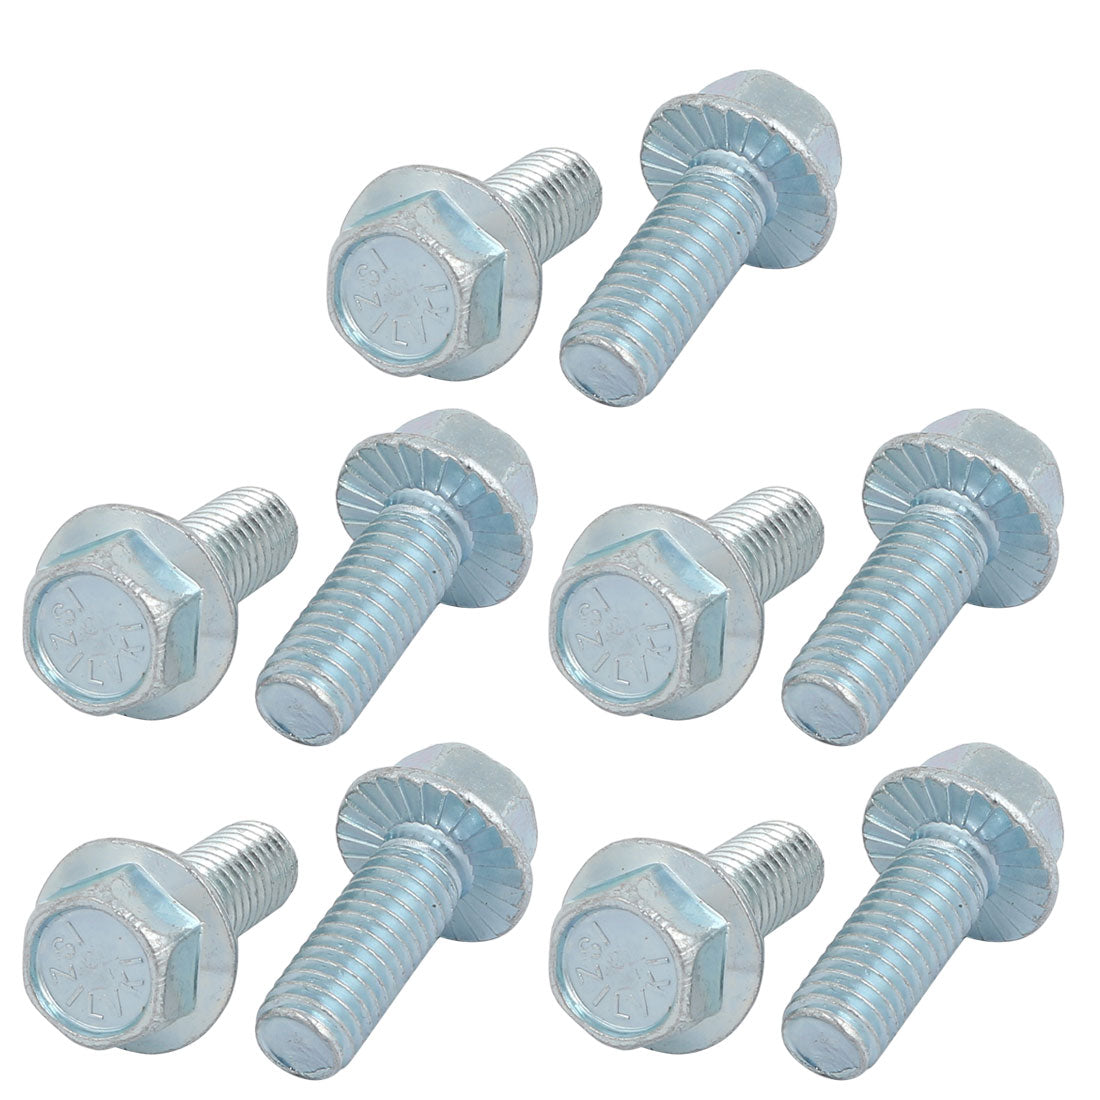 uxcell Uxcell 10Pcs 3/8-16 x 1 Inch Thread Carbon Steel Hex Serrated Head Flange Screw Bolt